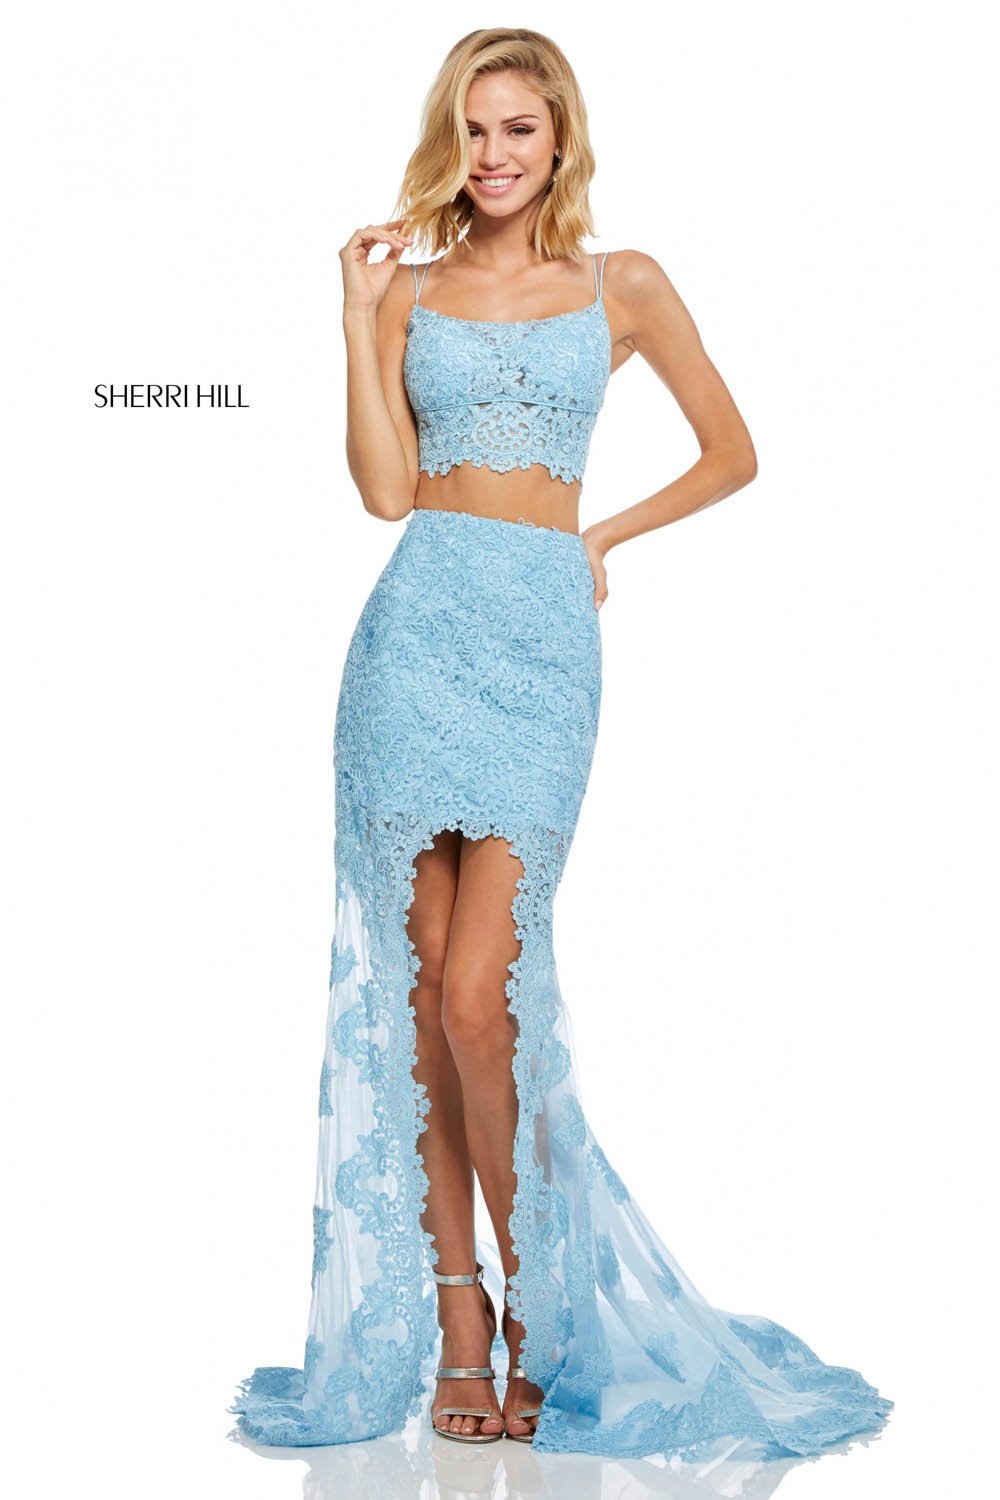 Sherri Hill 52634 dress images in these colors: Light Blue, Lilac, Ivory, Black, Red, Pink, Mocha, Yellow, Coral.